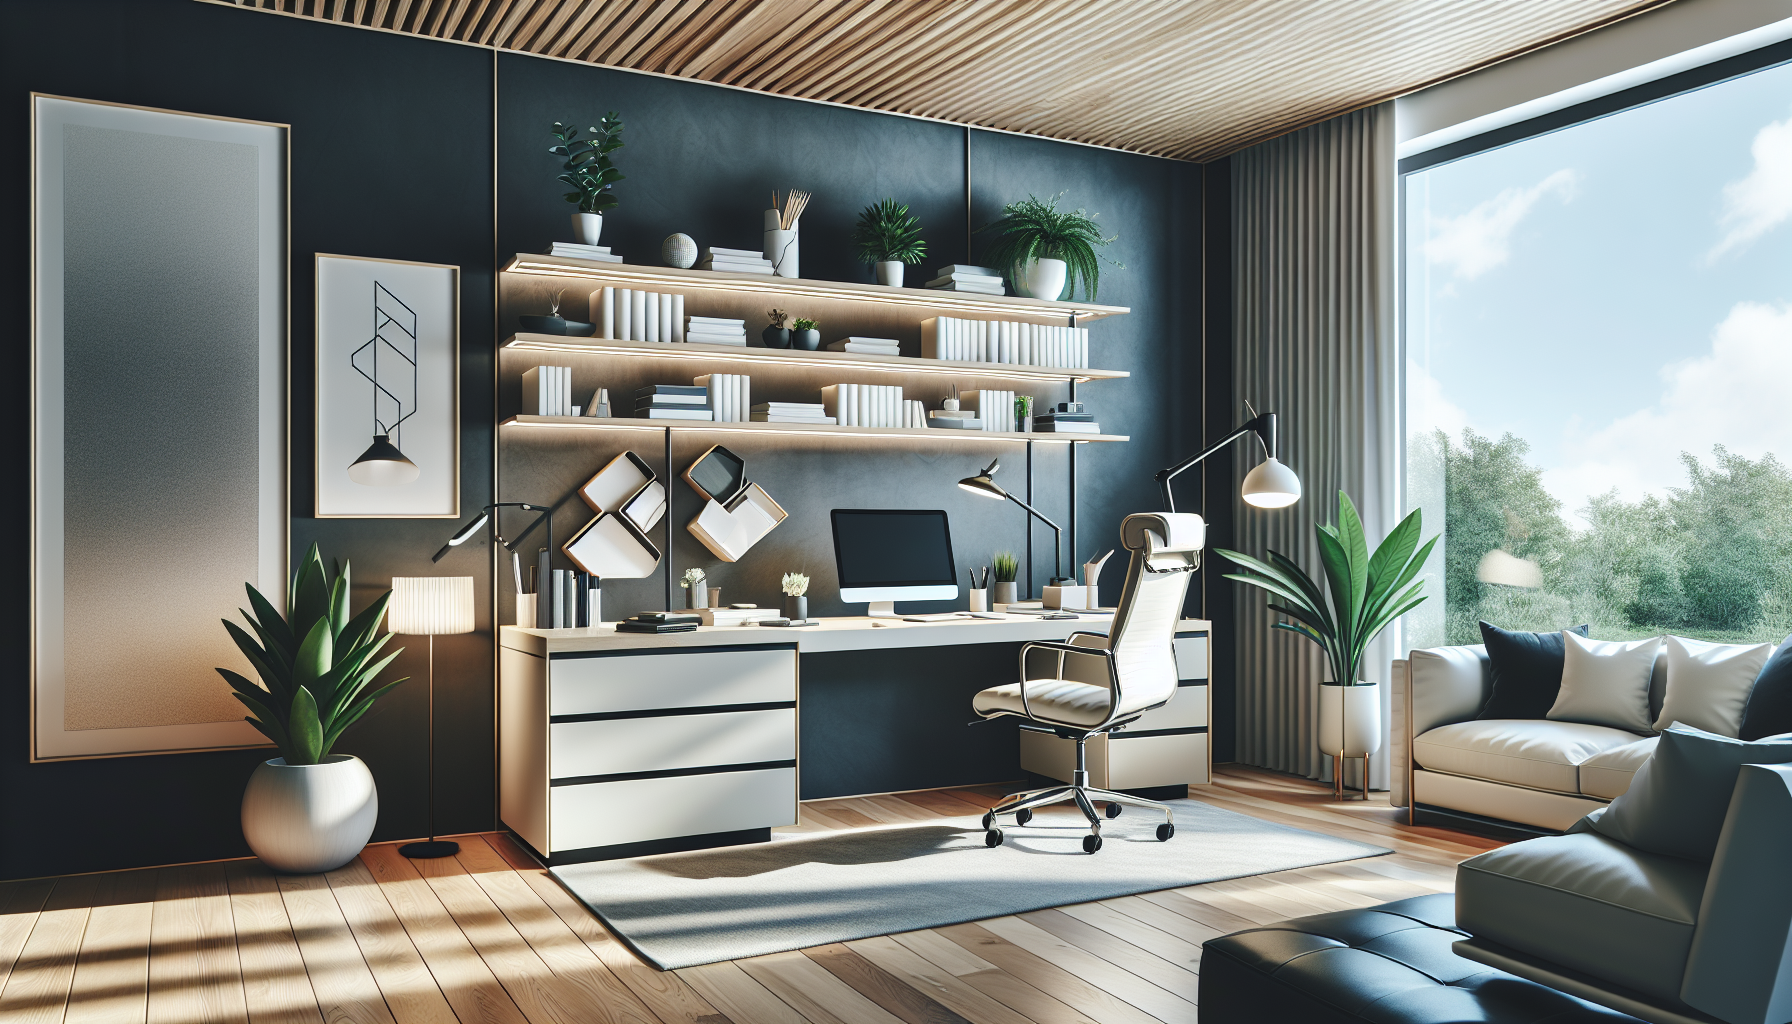 How Much Value Does A Home Office Add To A House?